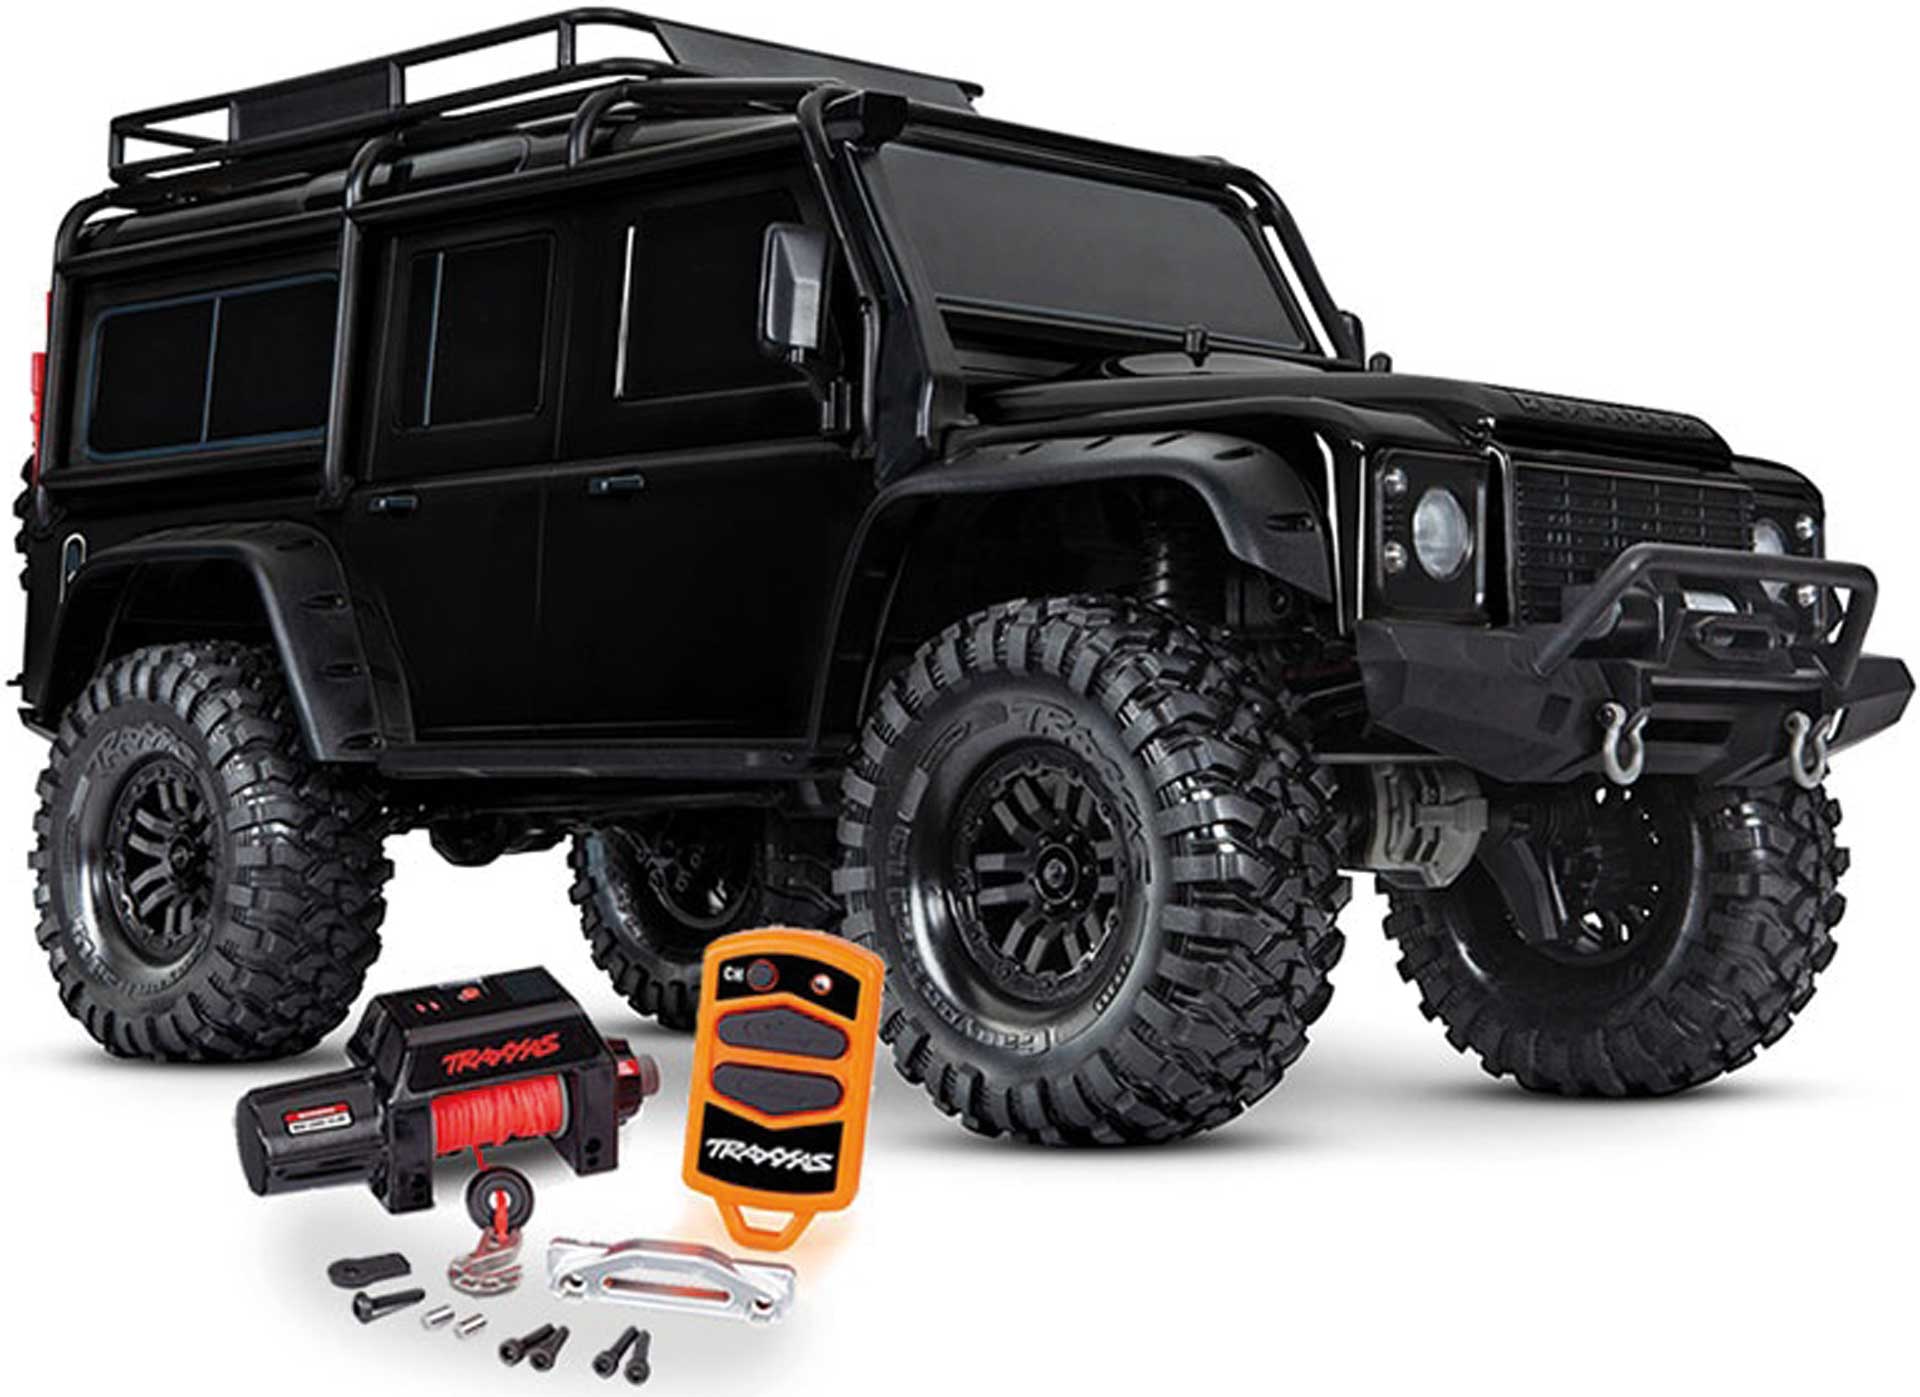 TRAXXAS TRX-4 Land Rover Defender Black 1/10 4X4 RTR Scale Crawler Brushed with Winch